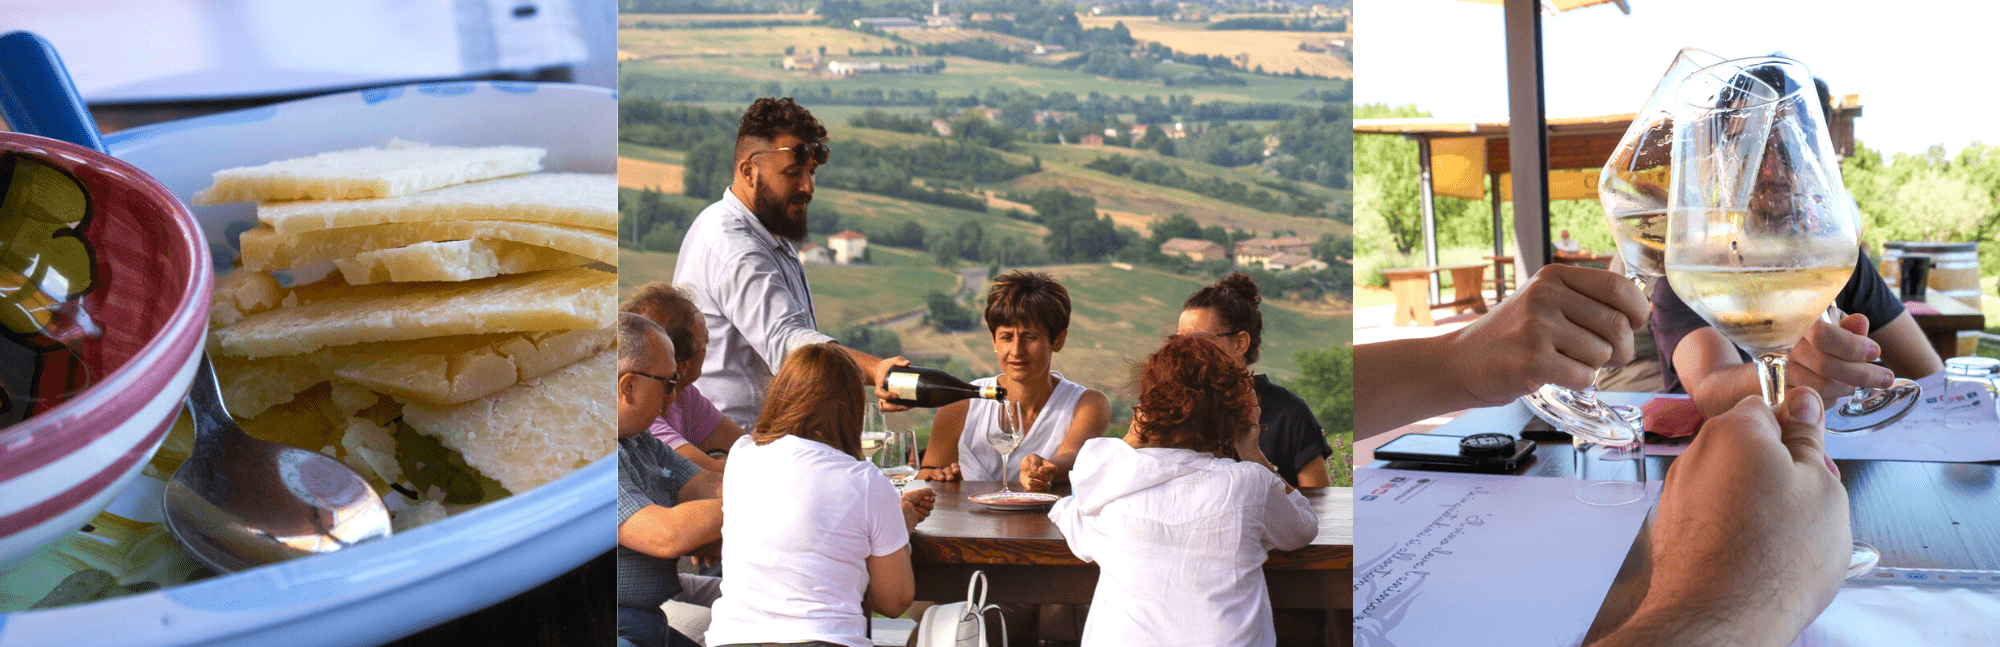 Wine tasting with Mattia from Cantina Il Poggio. The image represents a group of people, sitting at the table, ready to taste a glass of wine, along with food pairing. 